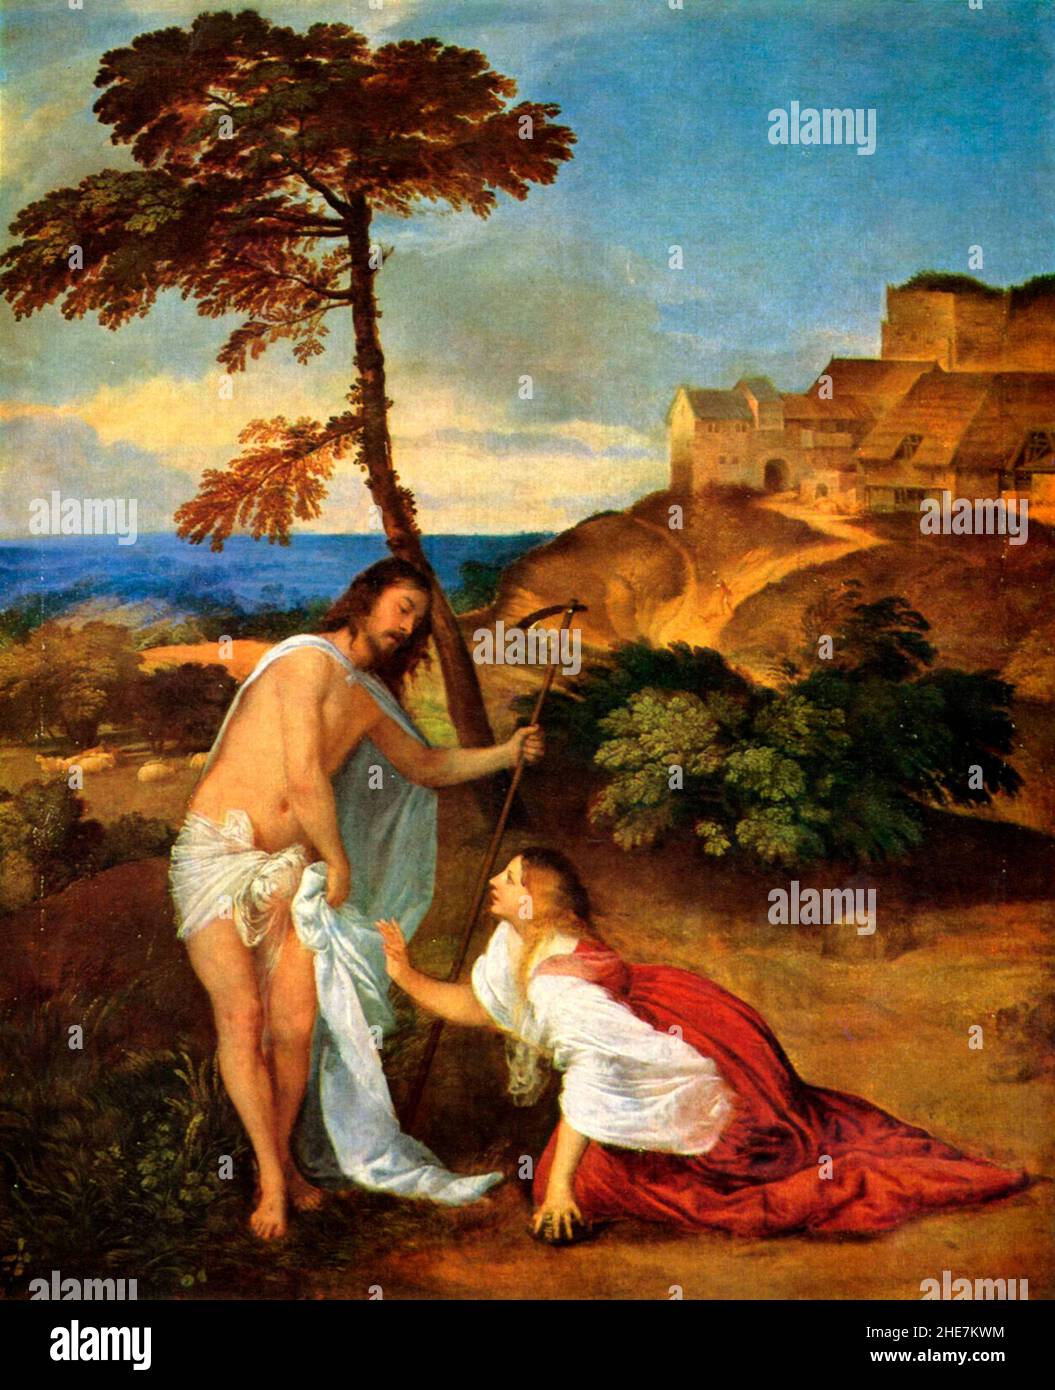 Noli me tangere - Do not touch me - Jesus with Mary Magdalene - Titian Stock Photo